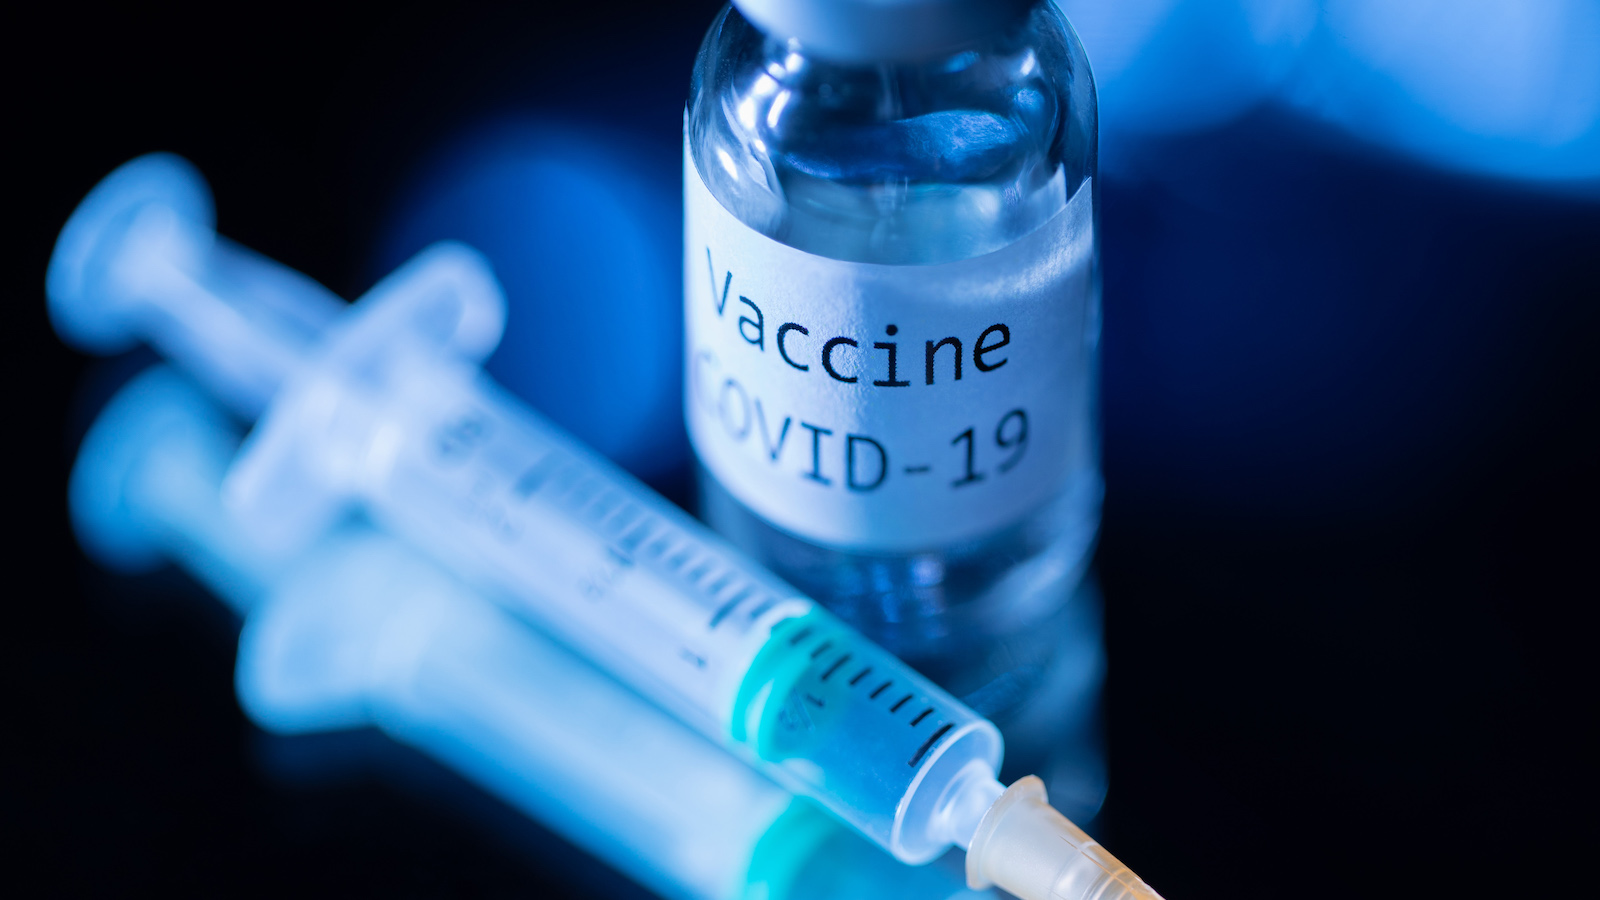 Can Covid-19 variants affect the effectiveness of Vaccines?